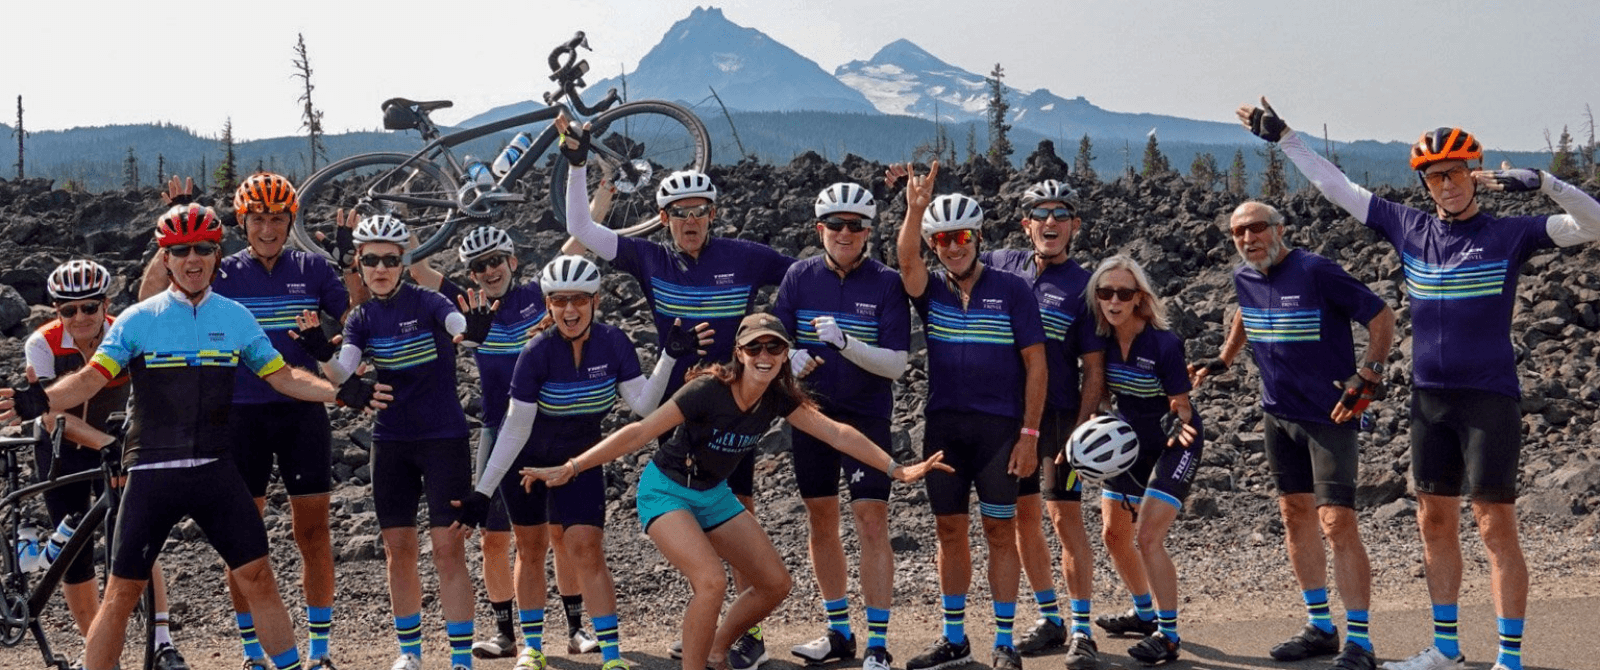 group of people posing in front of mountain view in their bike jerseys and helmets